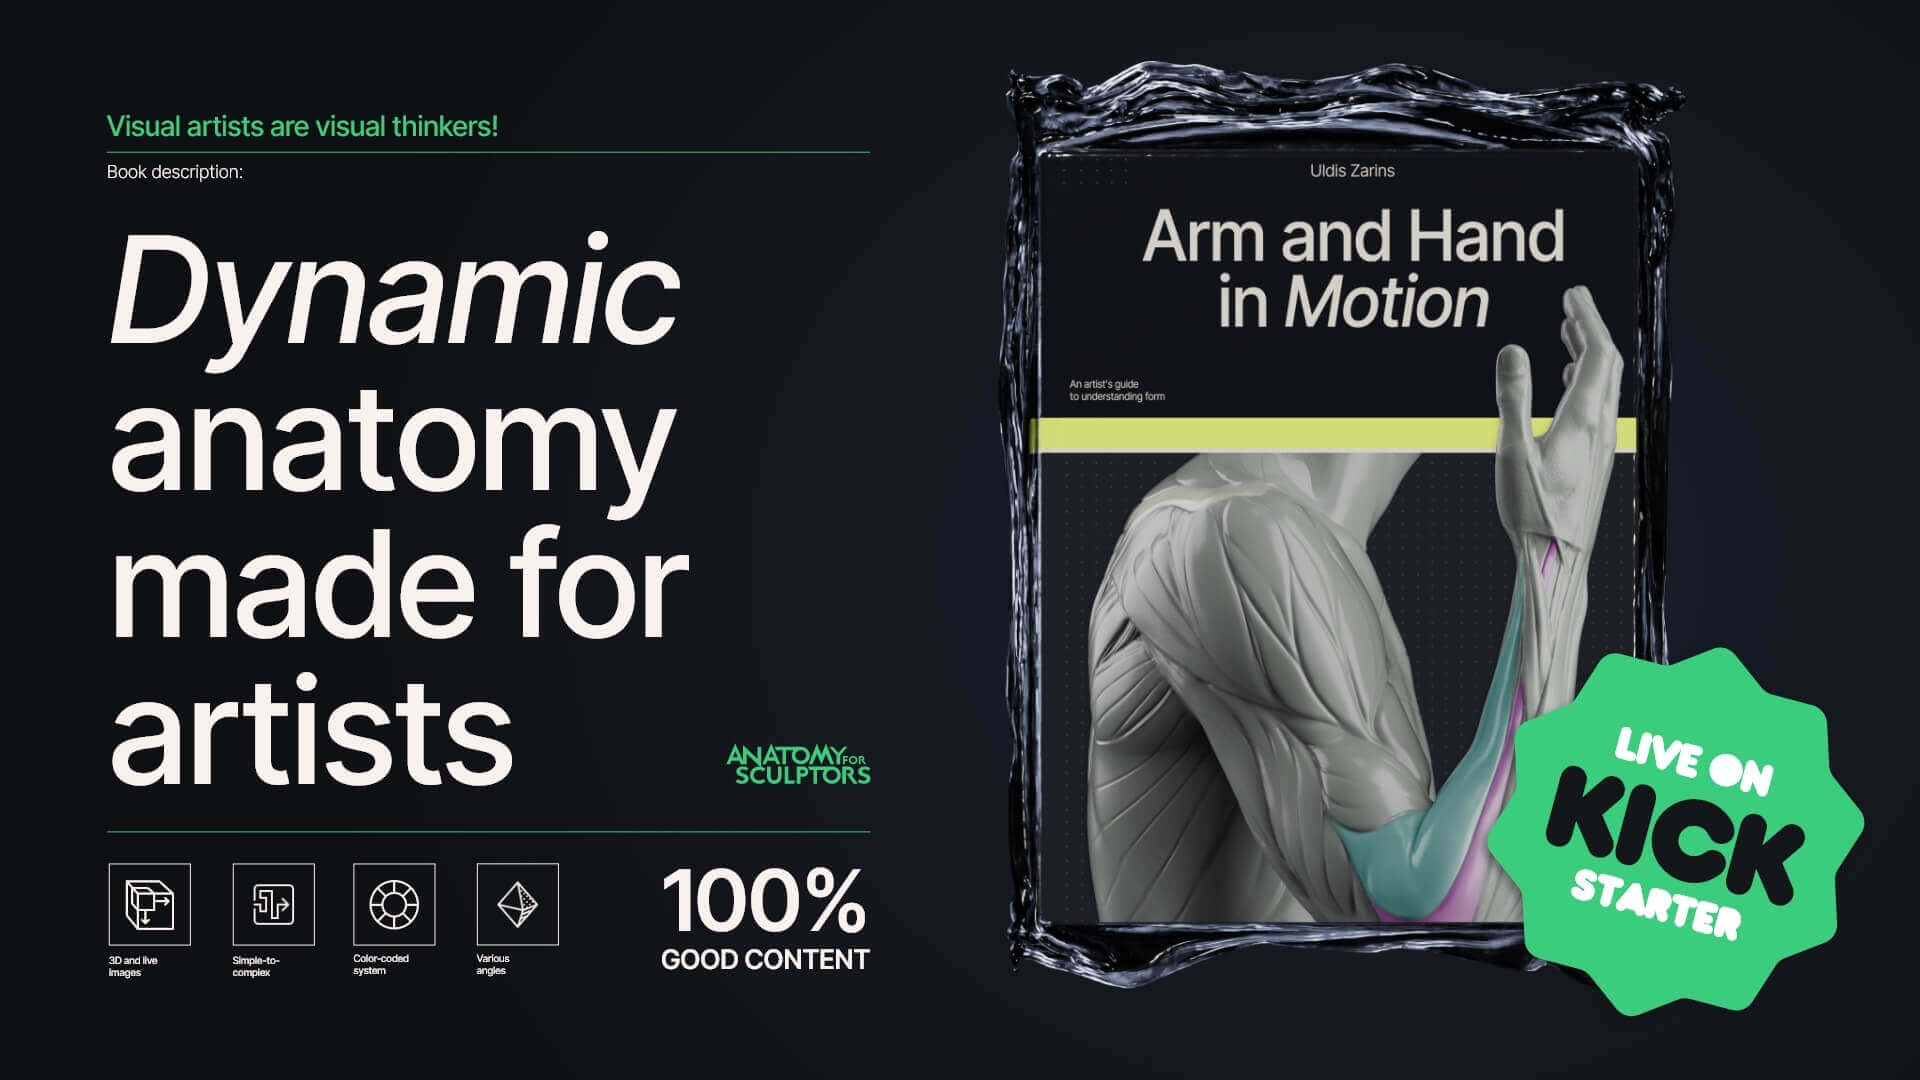 Arm and Hand in Motion is live on Kickstarter